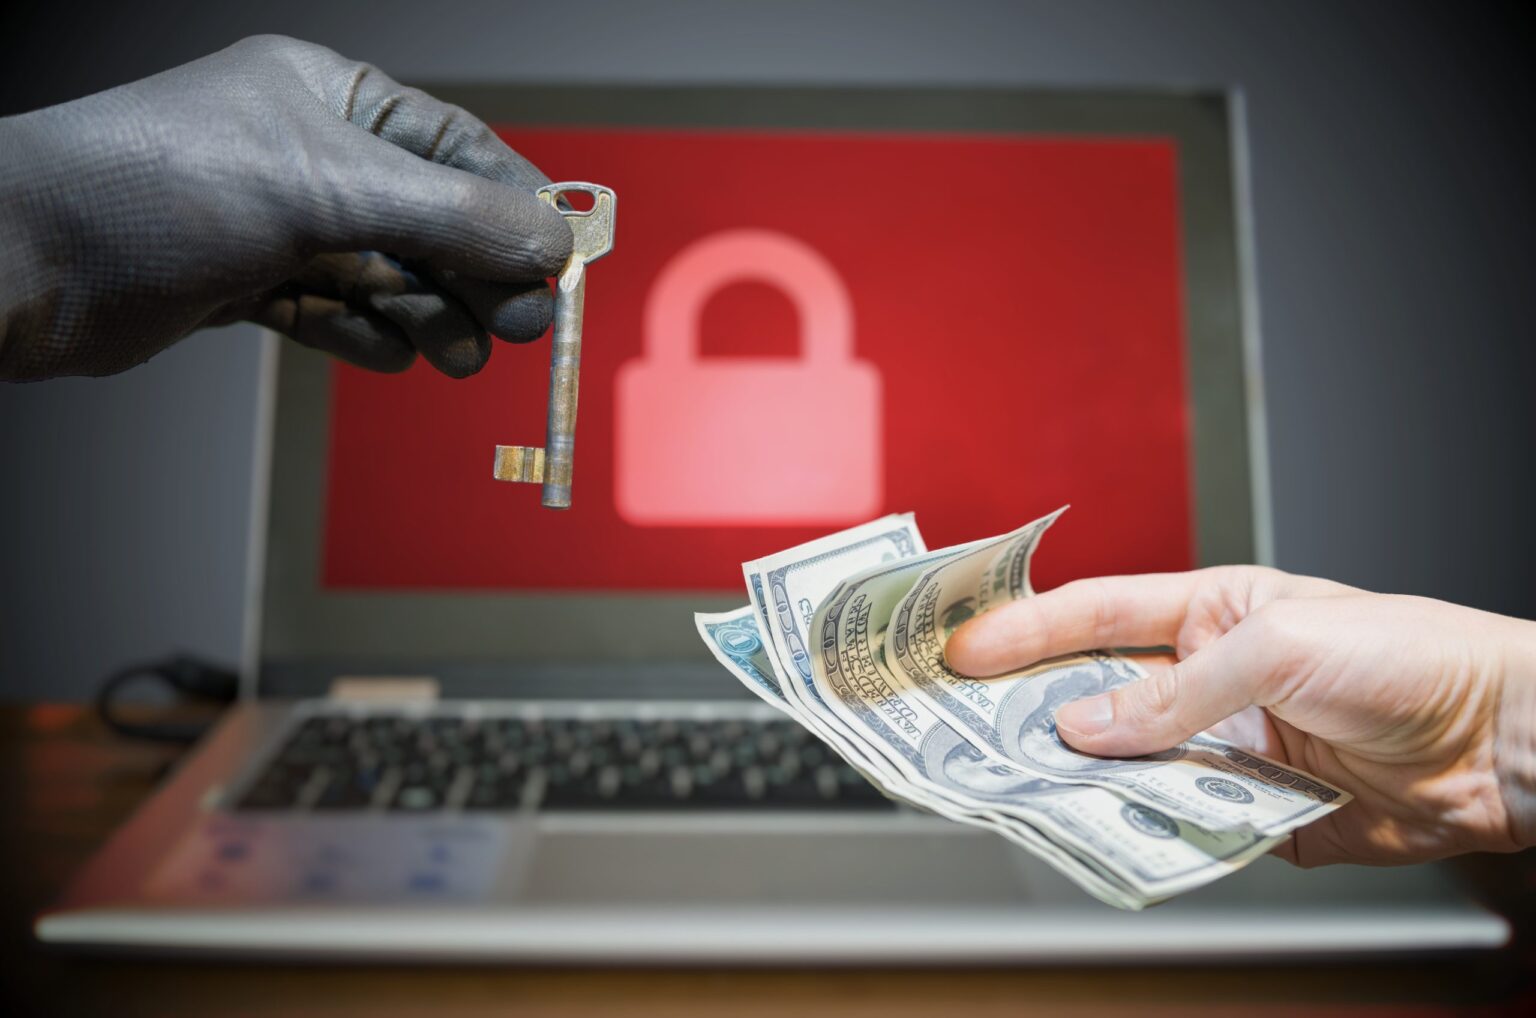 RANSOMWARE PAY